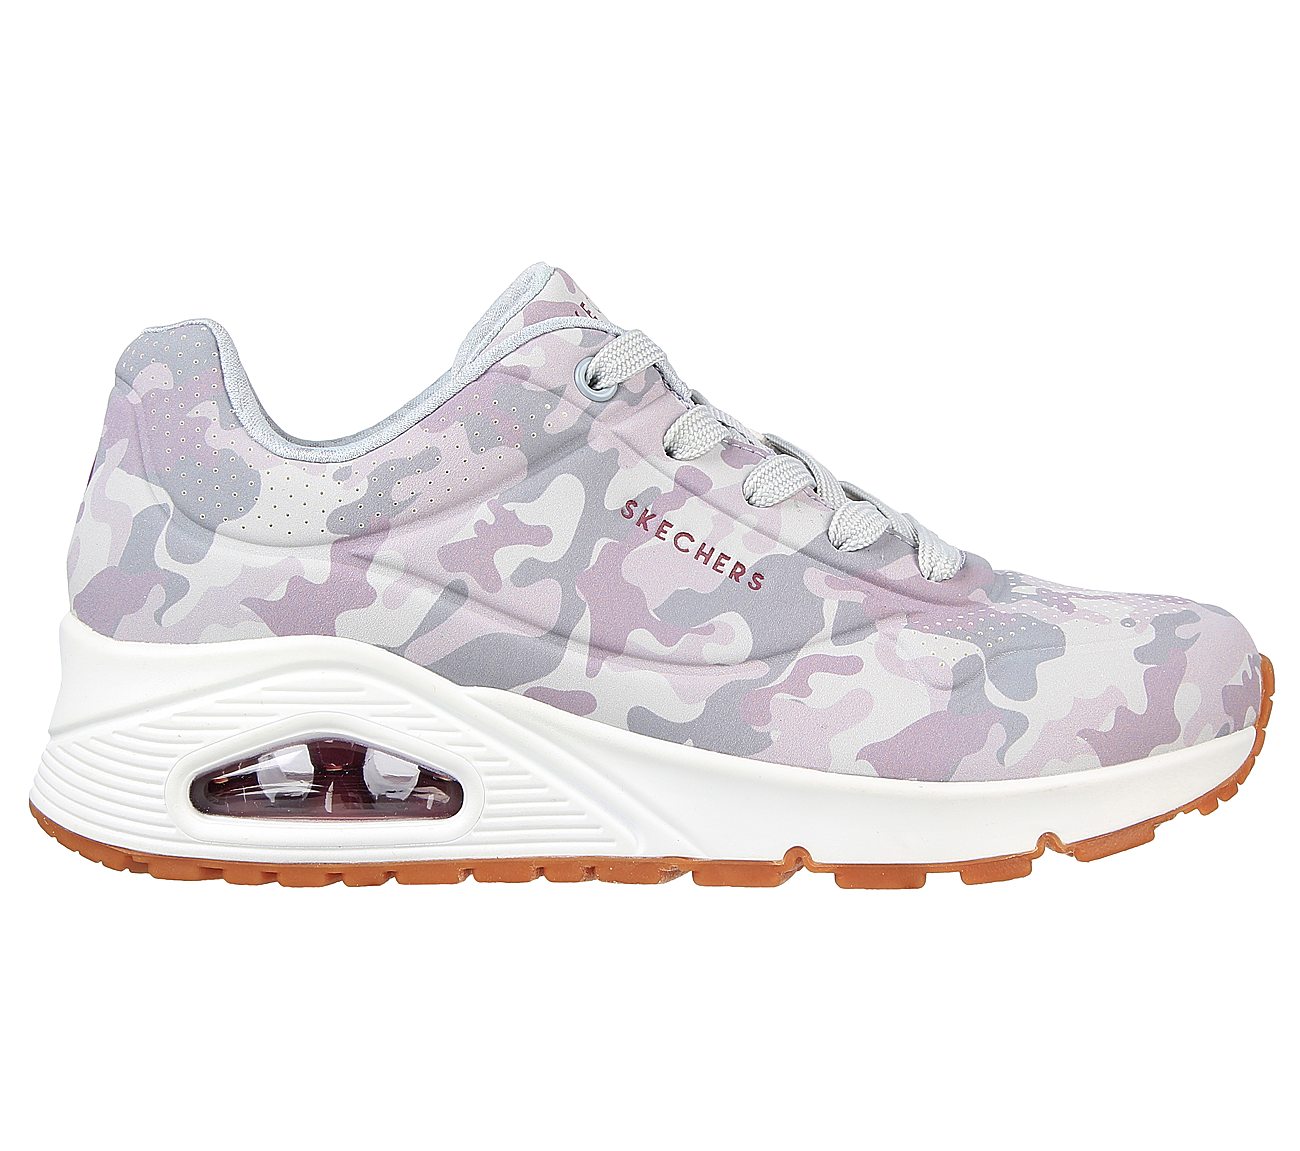 UNO-IN CAMO NEATO, CAMOUFLAGE Footwear Lateral View